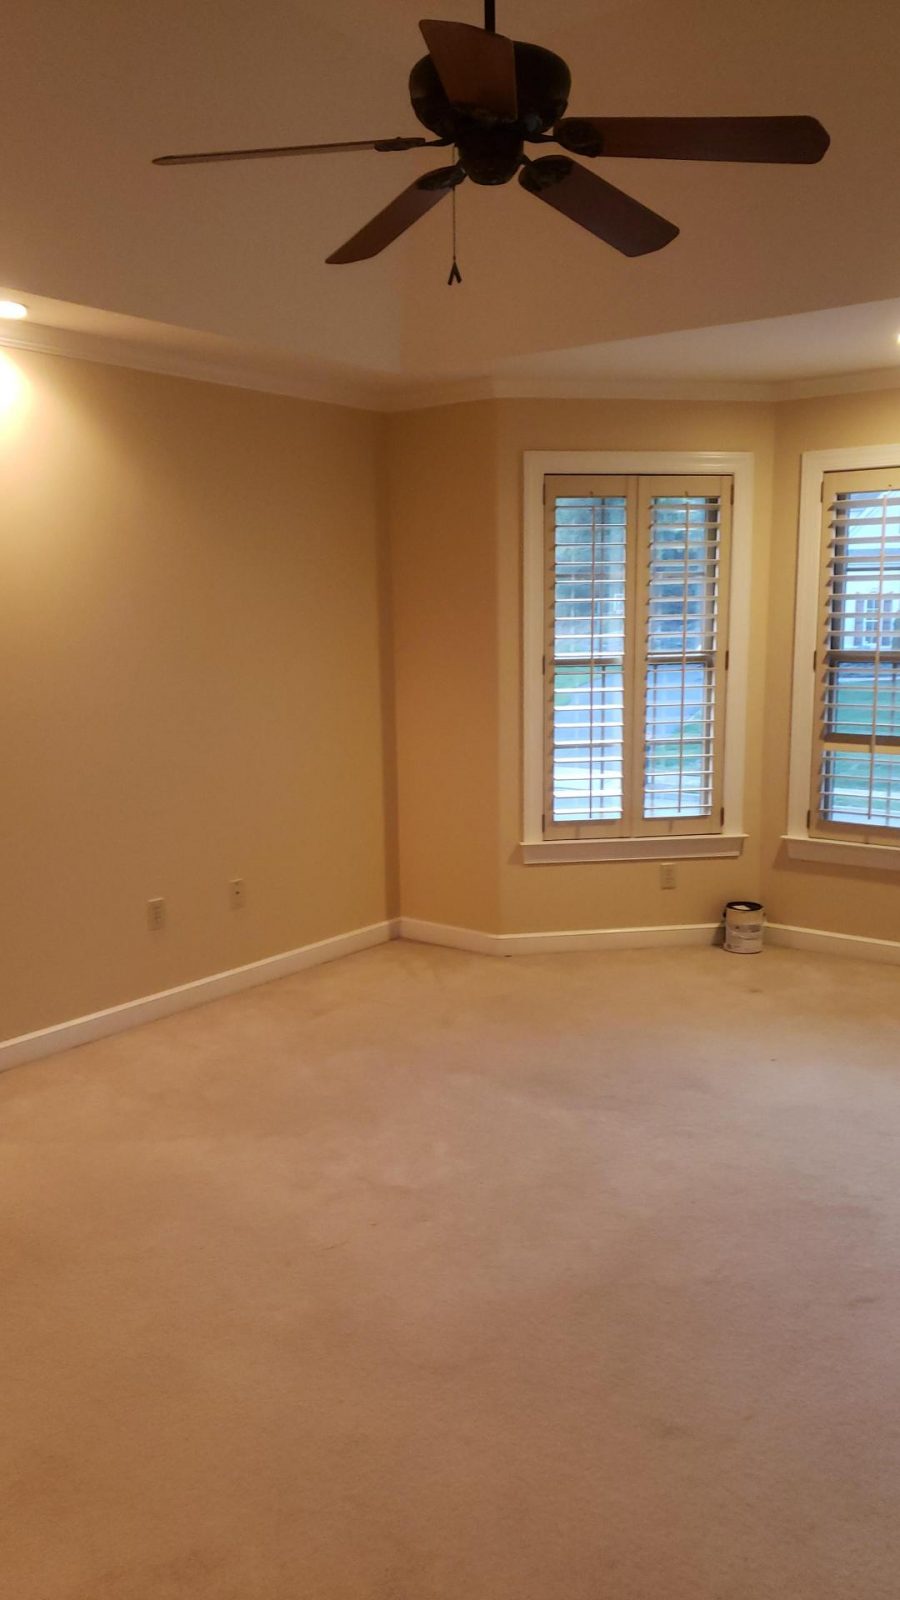 Beige Walls and windows in Easton, PA, after completed residential interior painting project by CertaPro Painters of the Greater Lehigh Valley Preview Image 1